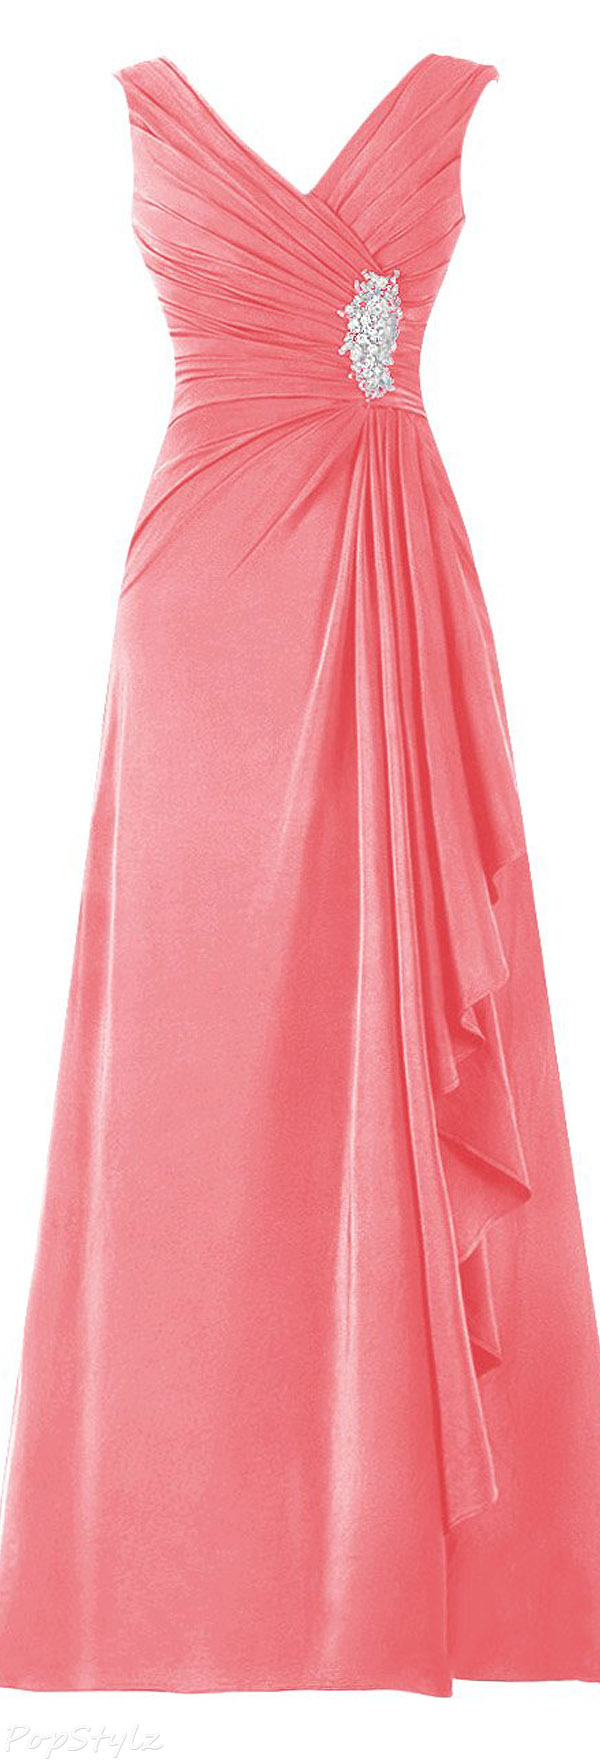 Diyouth Women's Coral Long Pleated Ruffles Mother of the Bride Evening Gown Dress